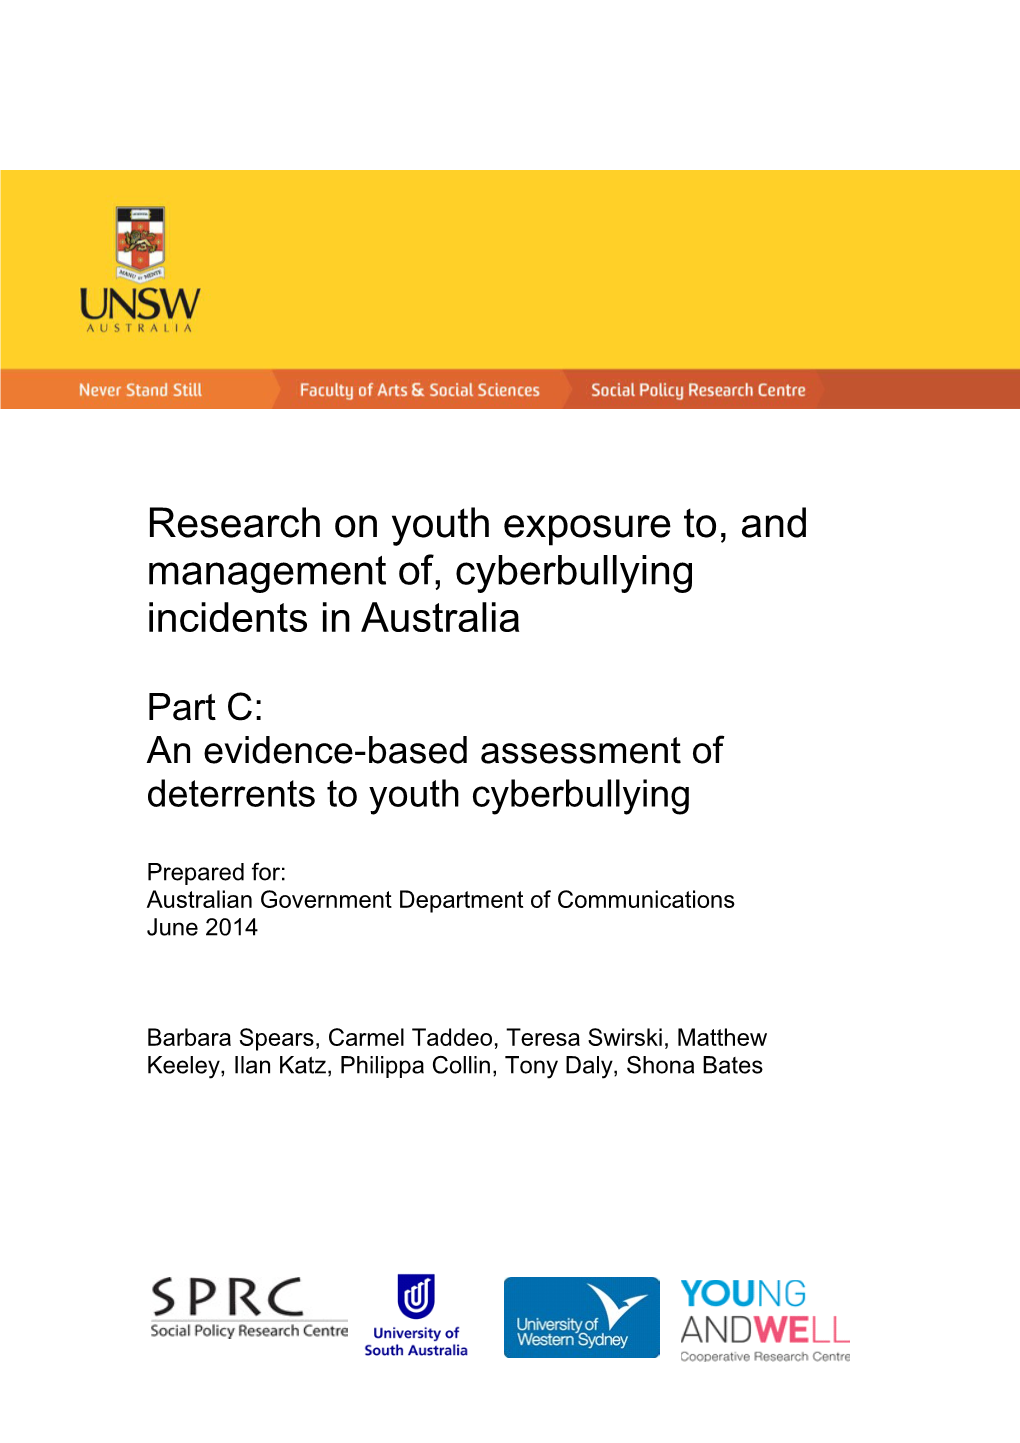 Research on Youth Exposure To, and Management Of, Cyberbullying Incidents in Australia